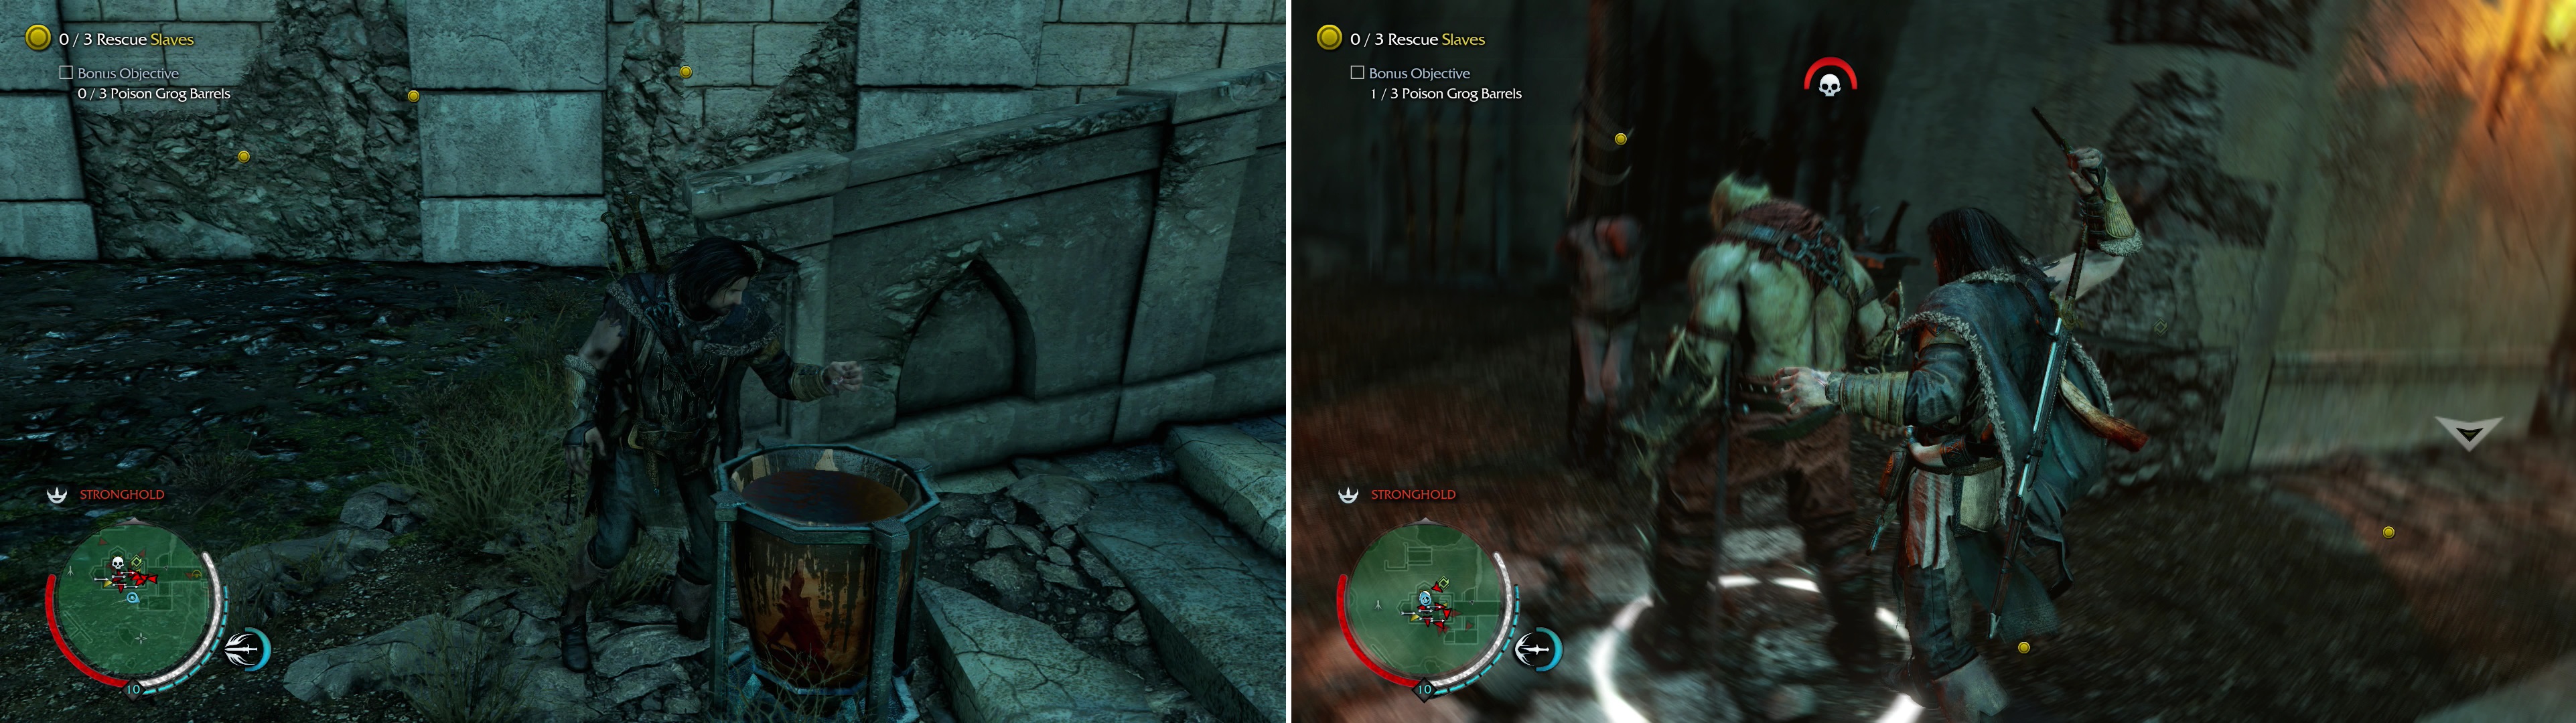 Poison Grog Barrels to satisfy the bonus objectives for this mission-Uruks don't need to actually drink from them (left)-then free the Slaves, especially ones being taunted by Uruks (right).